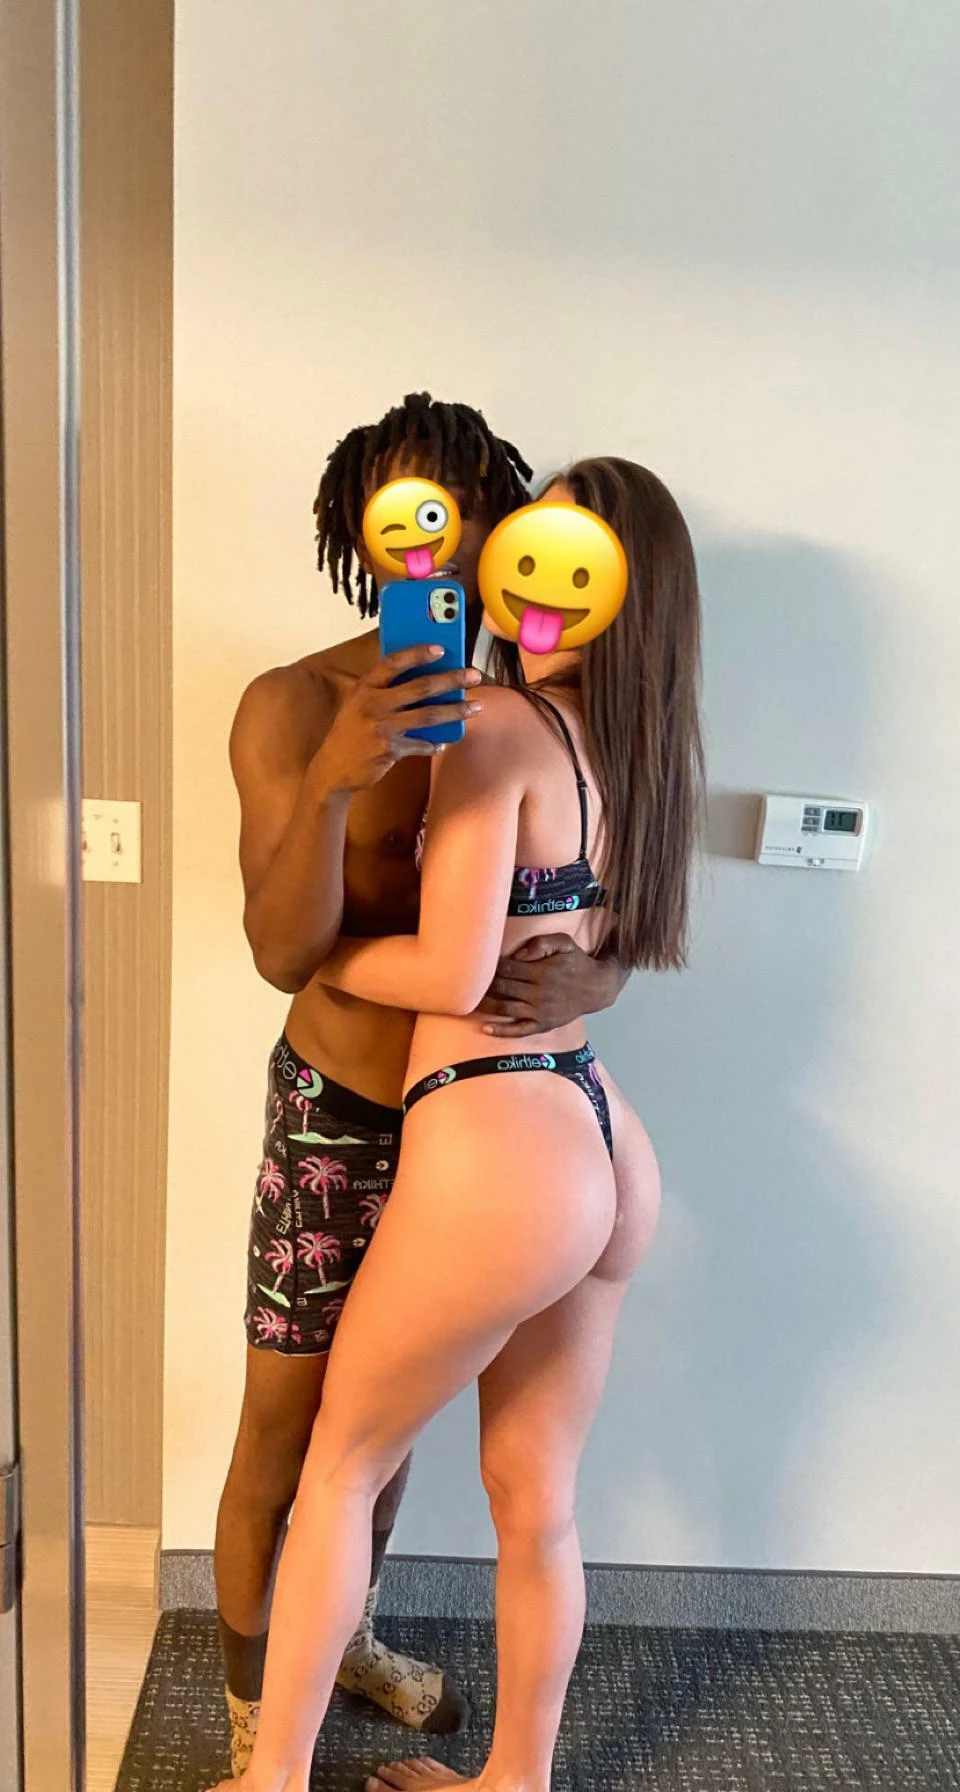 We are young and horny couple who would like to watch us??